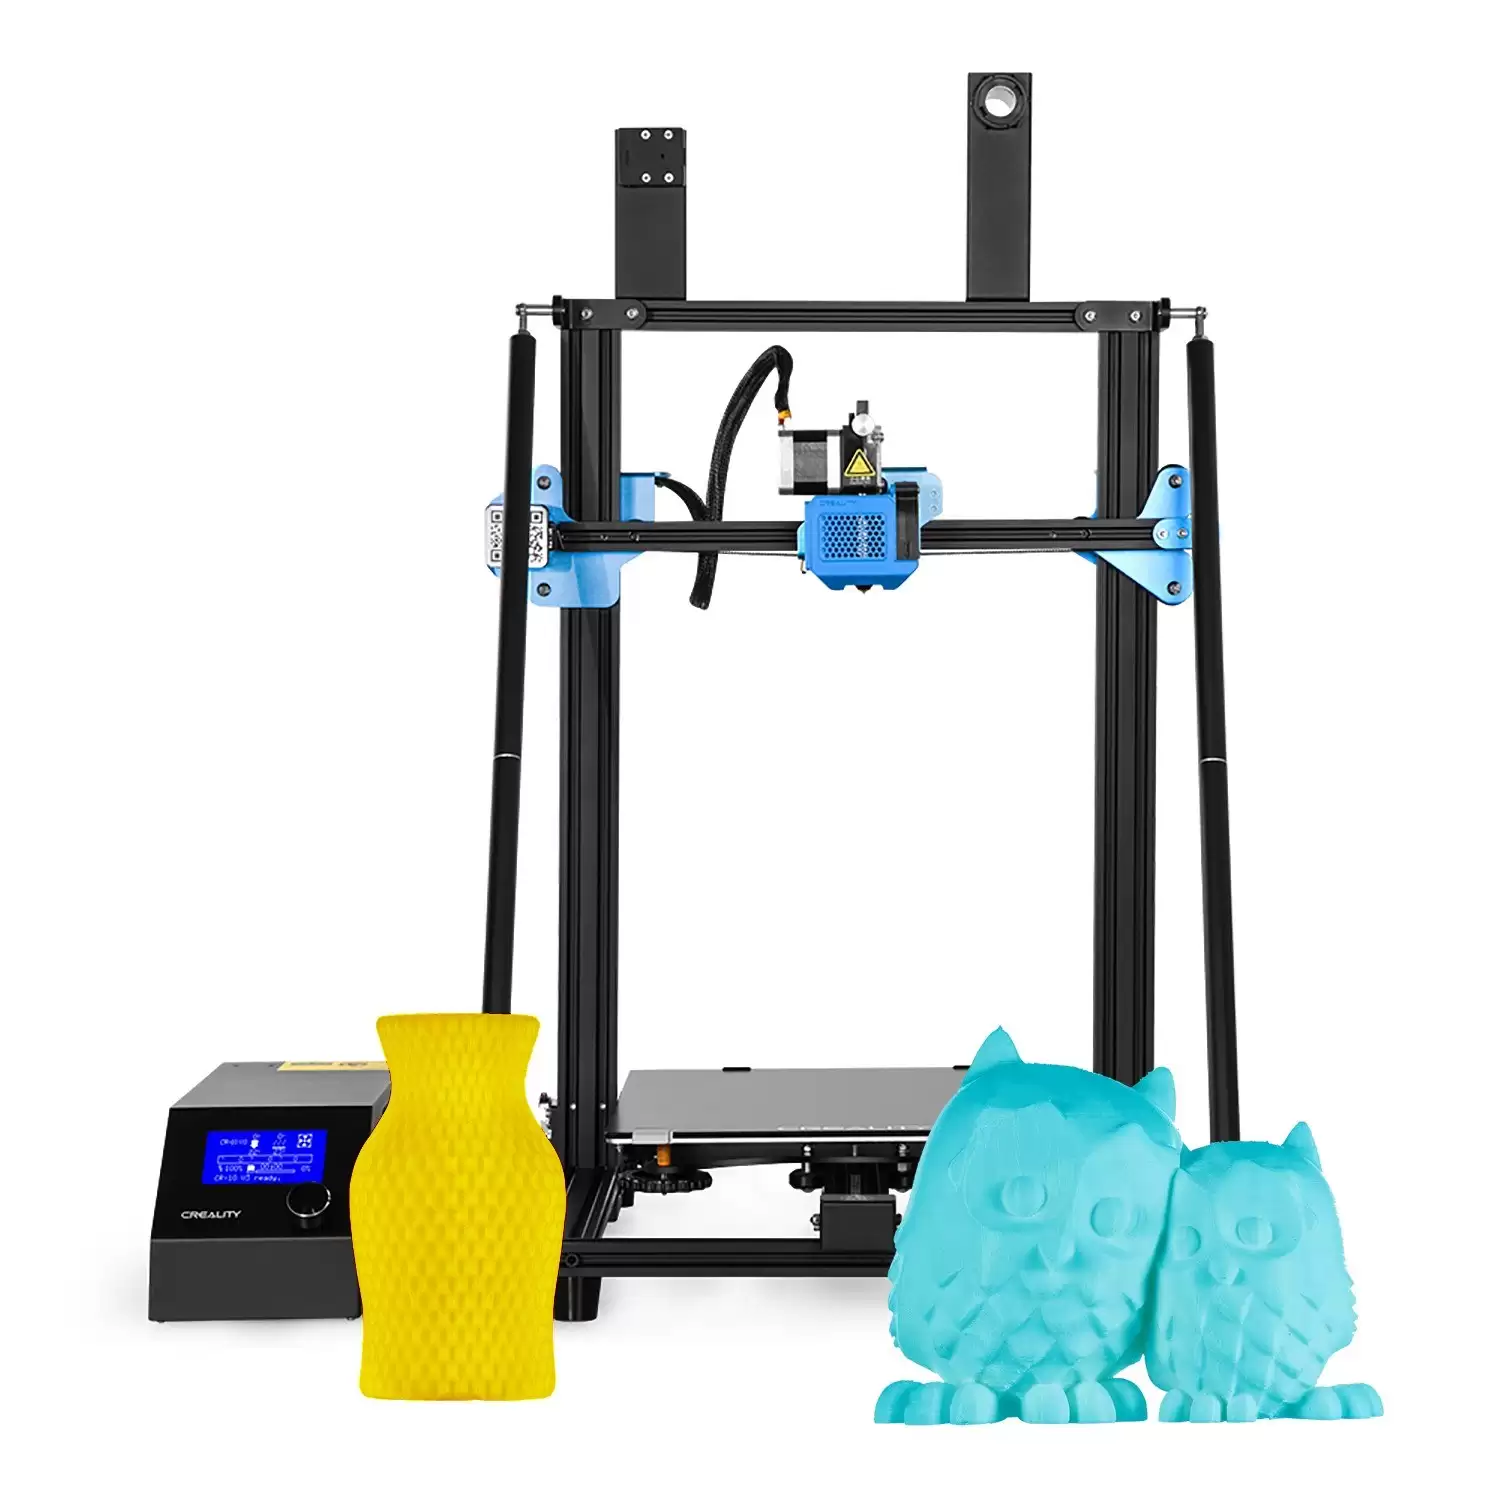 Get Extra 51% Discount On Creality 3d Cr-10 V3 Upgrade High Precision 3d Printer Diy Kit, Limited Offers $368.5 With This Discount Coupon At Tomtop